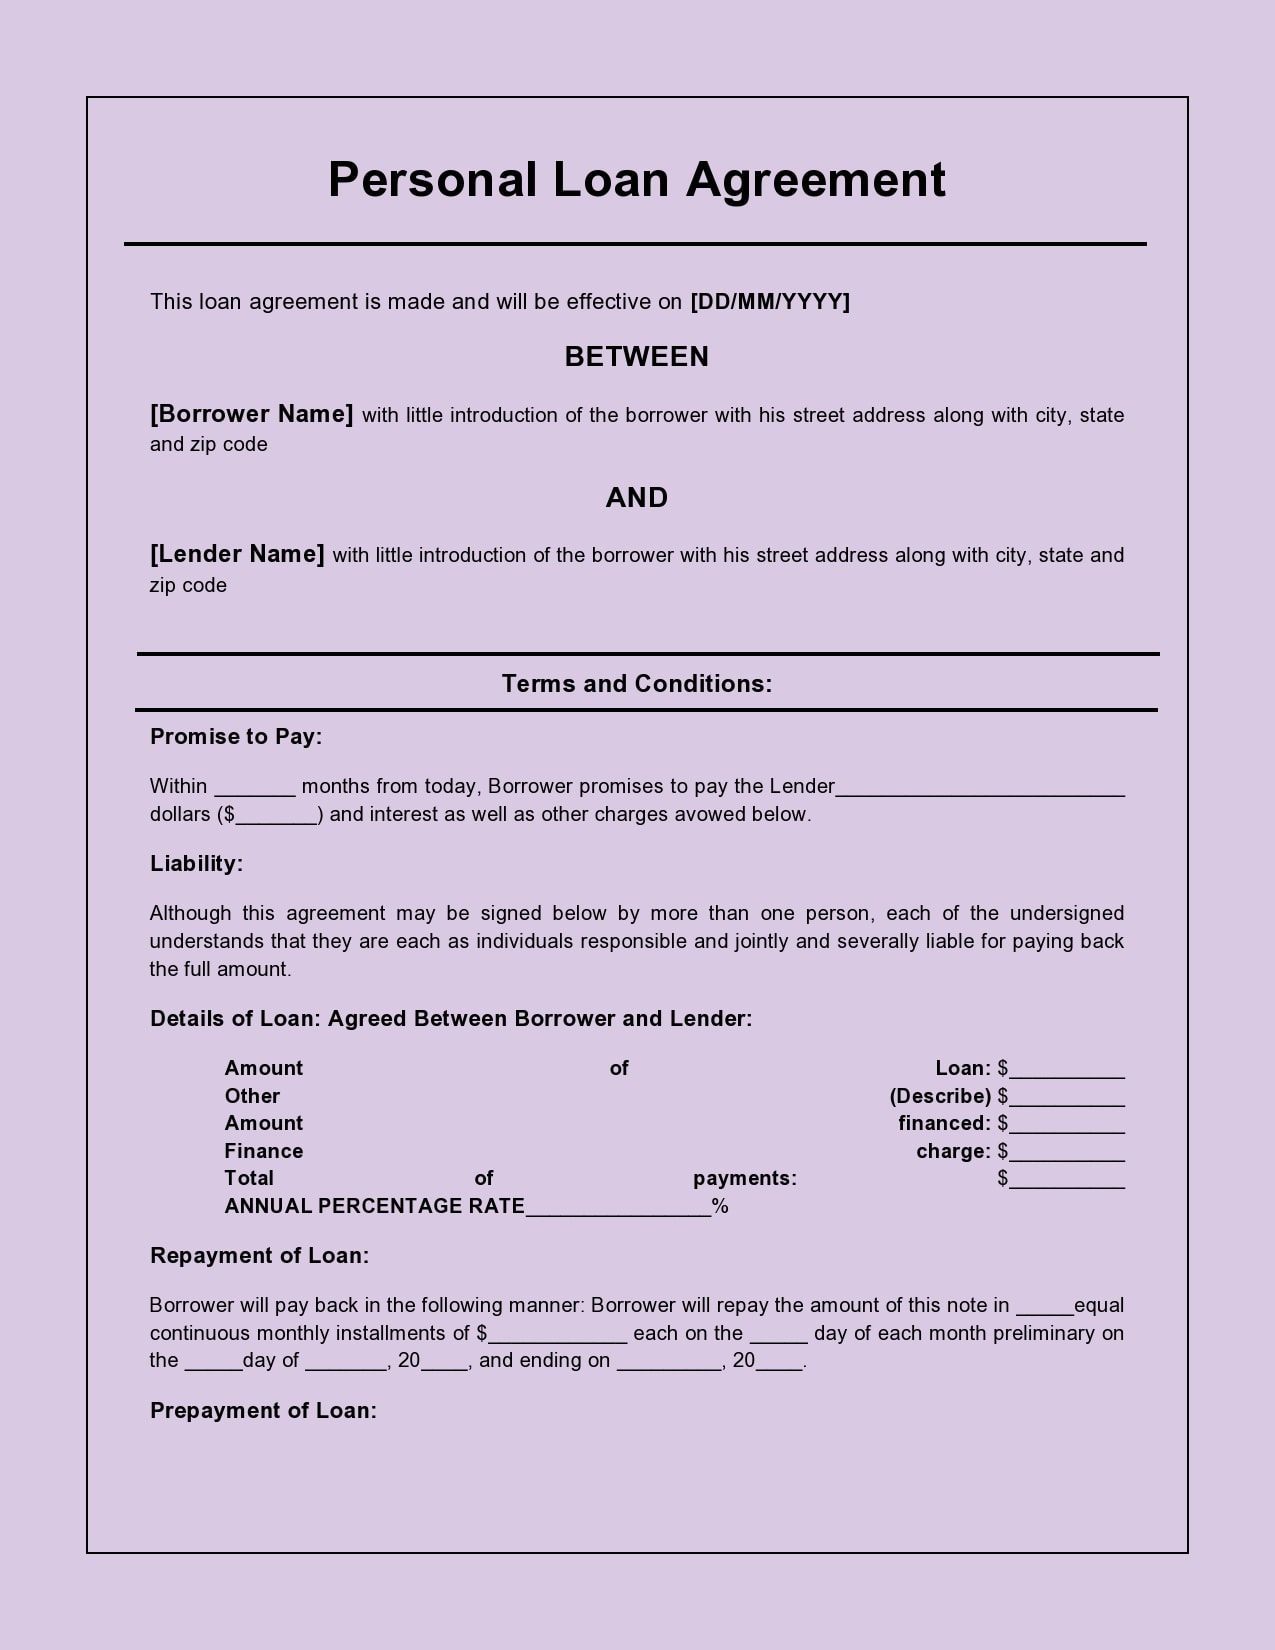 22 Free Personal Loan Templates & Agreements - TemplateArchive Pertaining To personal loan repayment agreement template